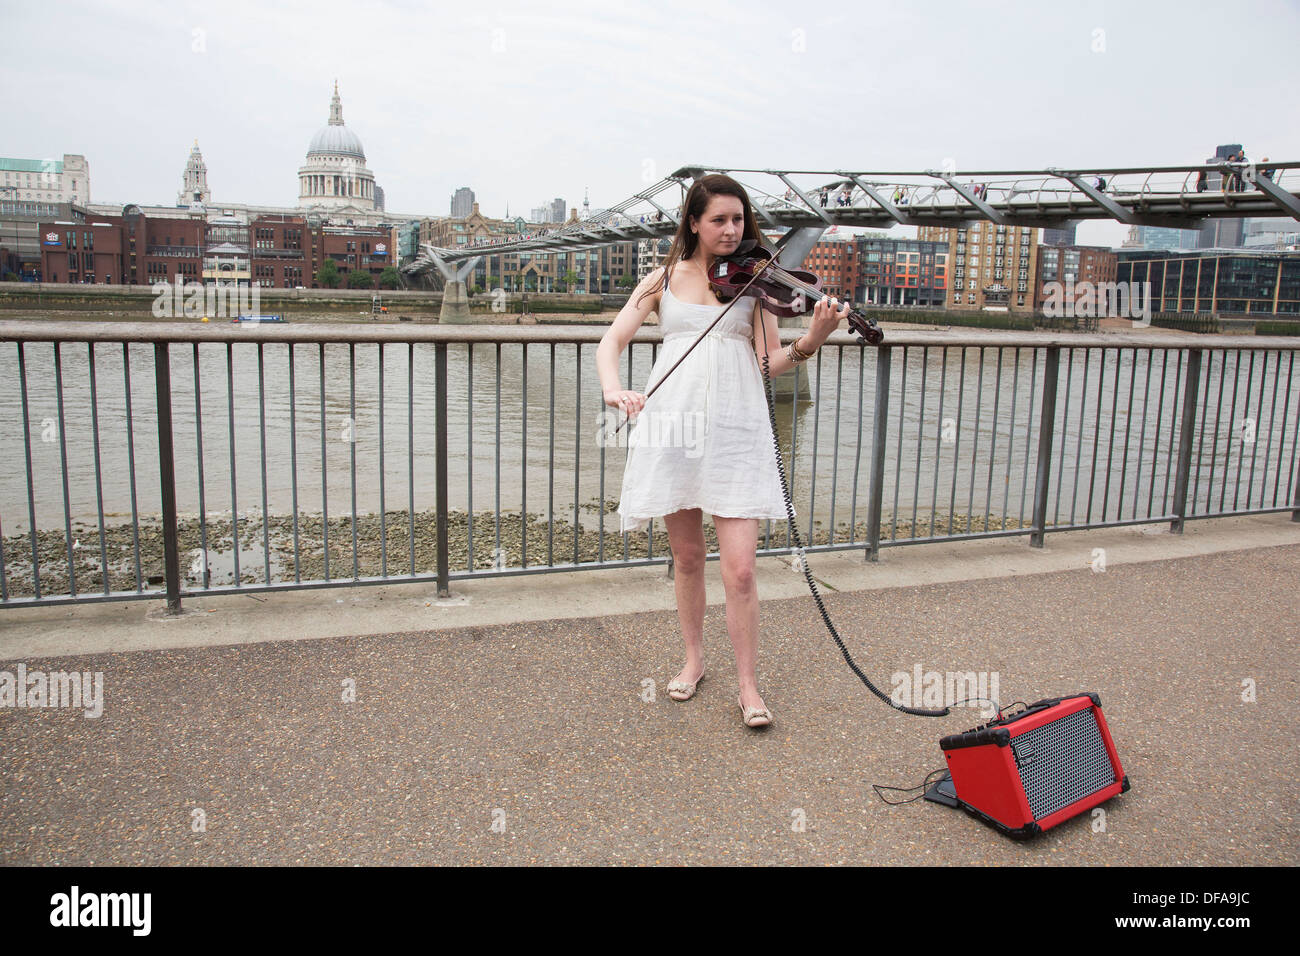 Young busker performing her violin music at Bankside near Millennium Bridge on the Southbank. South Bank is a significant arts and entertainment district, it's riverside walkway busy with visitors and tourists. London, UK. Stock Photo